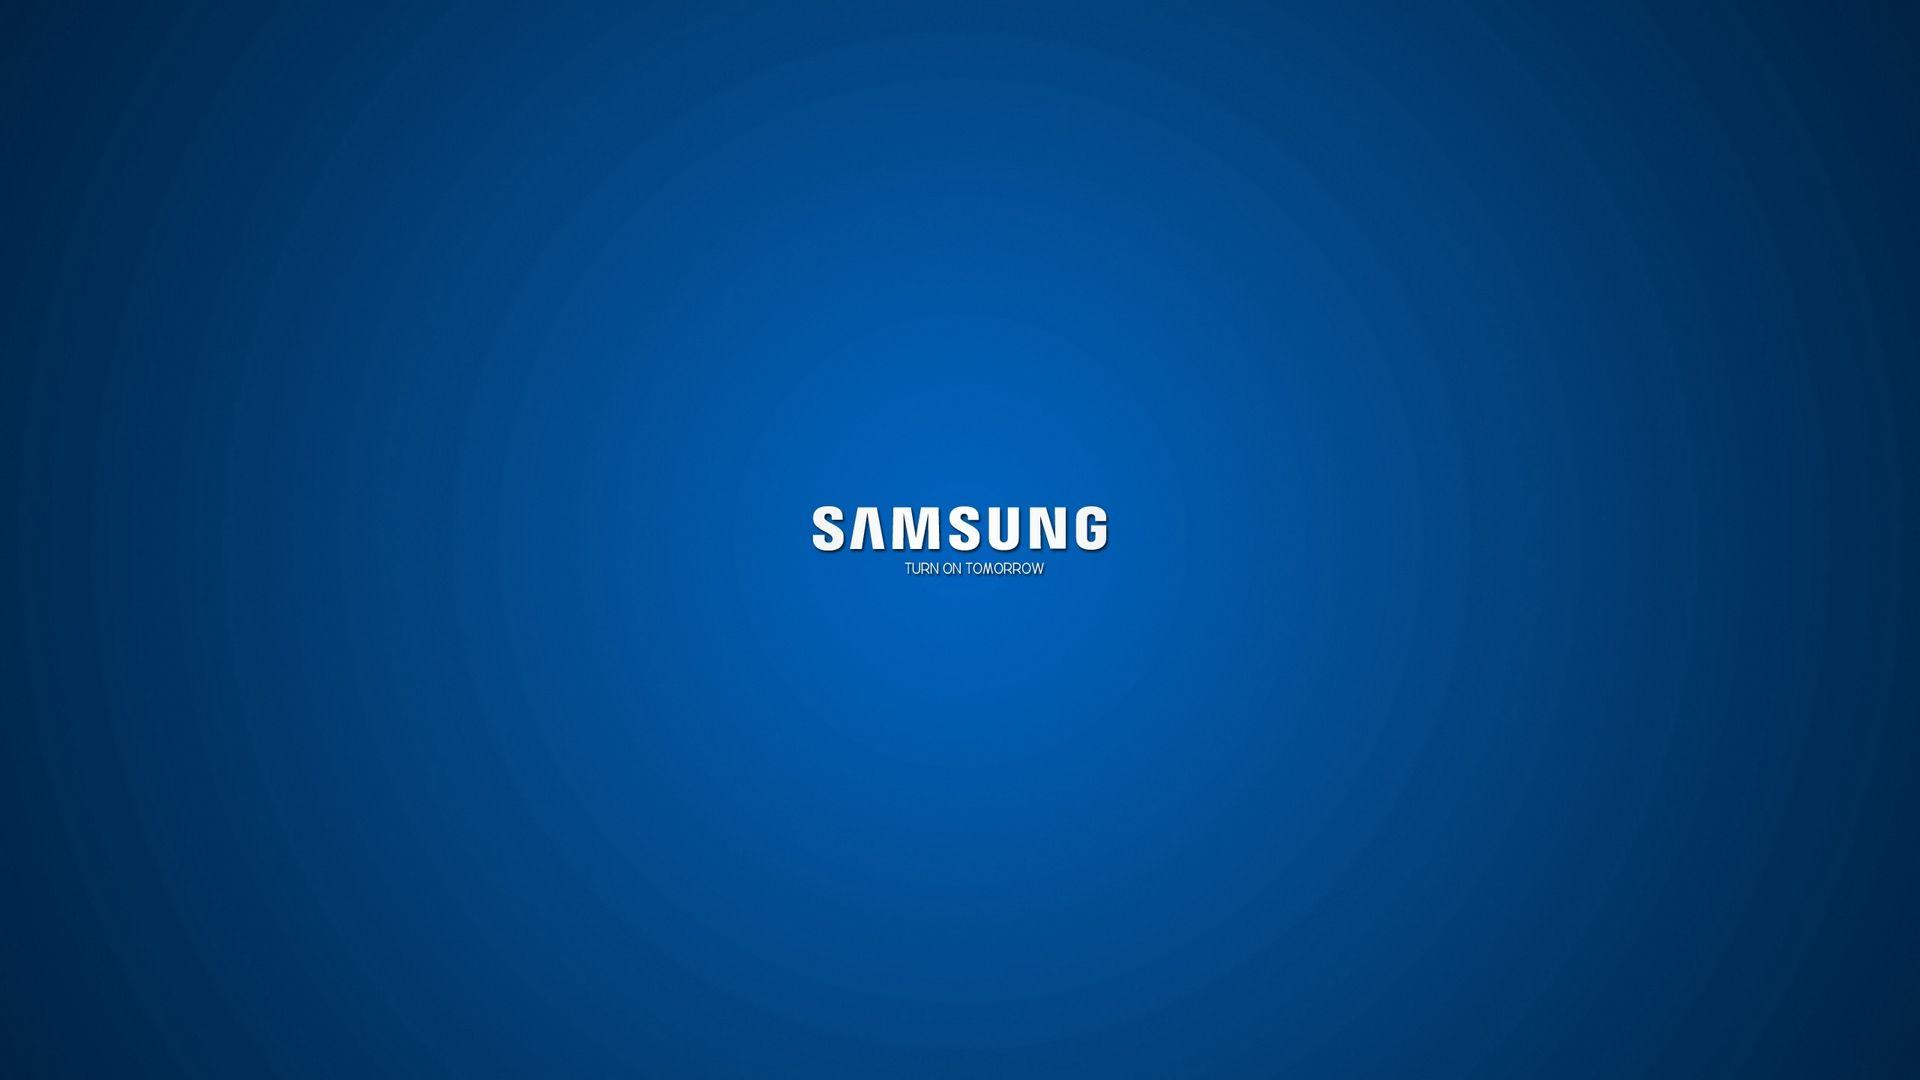 Samsung 1080P Wallpapers - Top Free